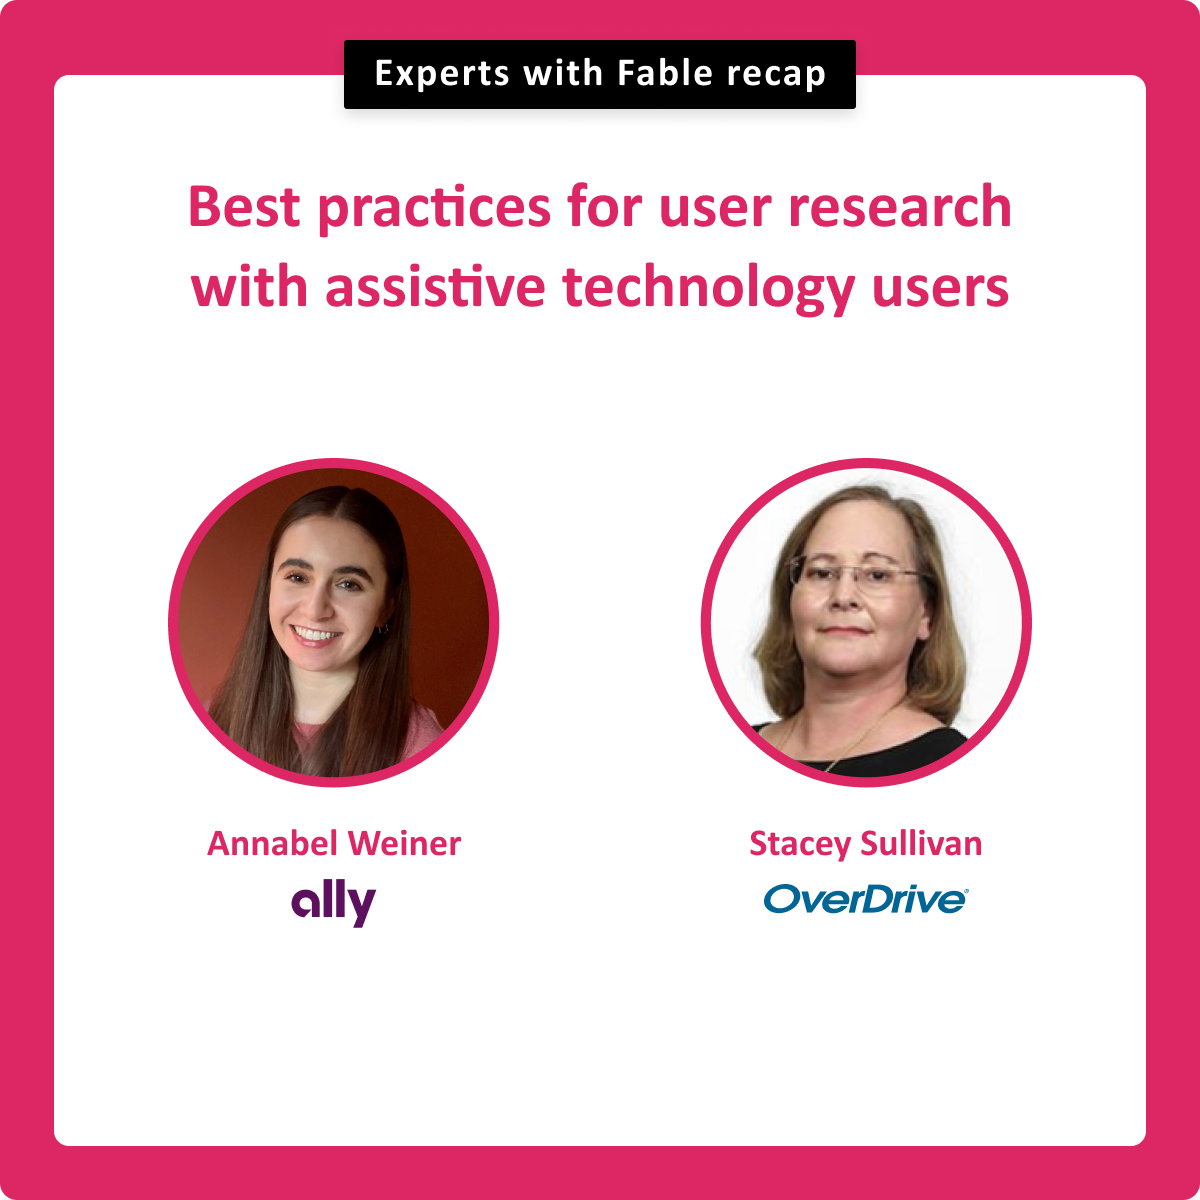 Best practices for user research with assistive techology users. Annabel Weiner, ally. Stacey Sullivan, Overdrive.